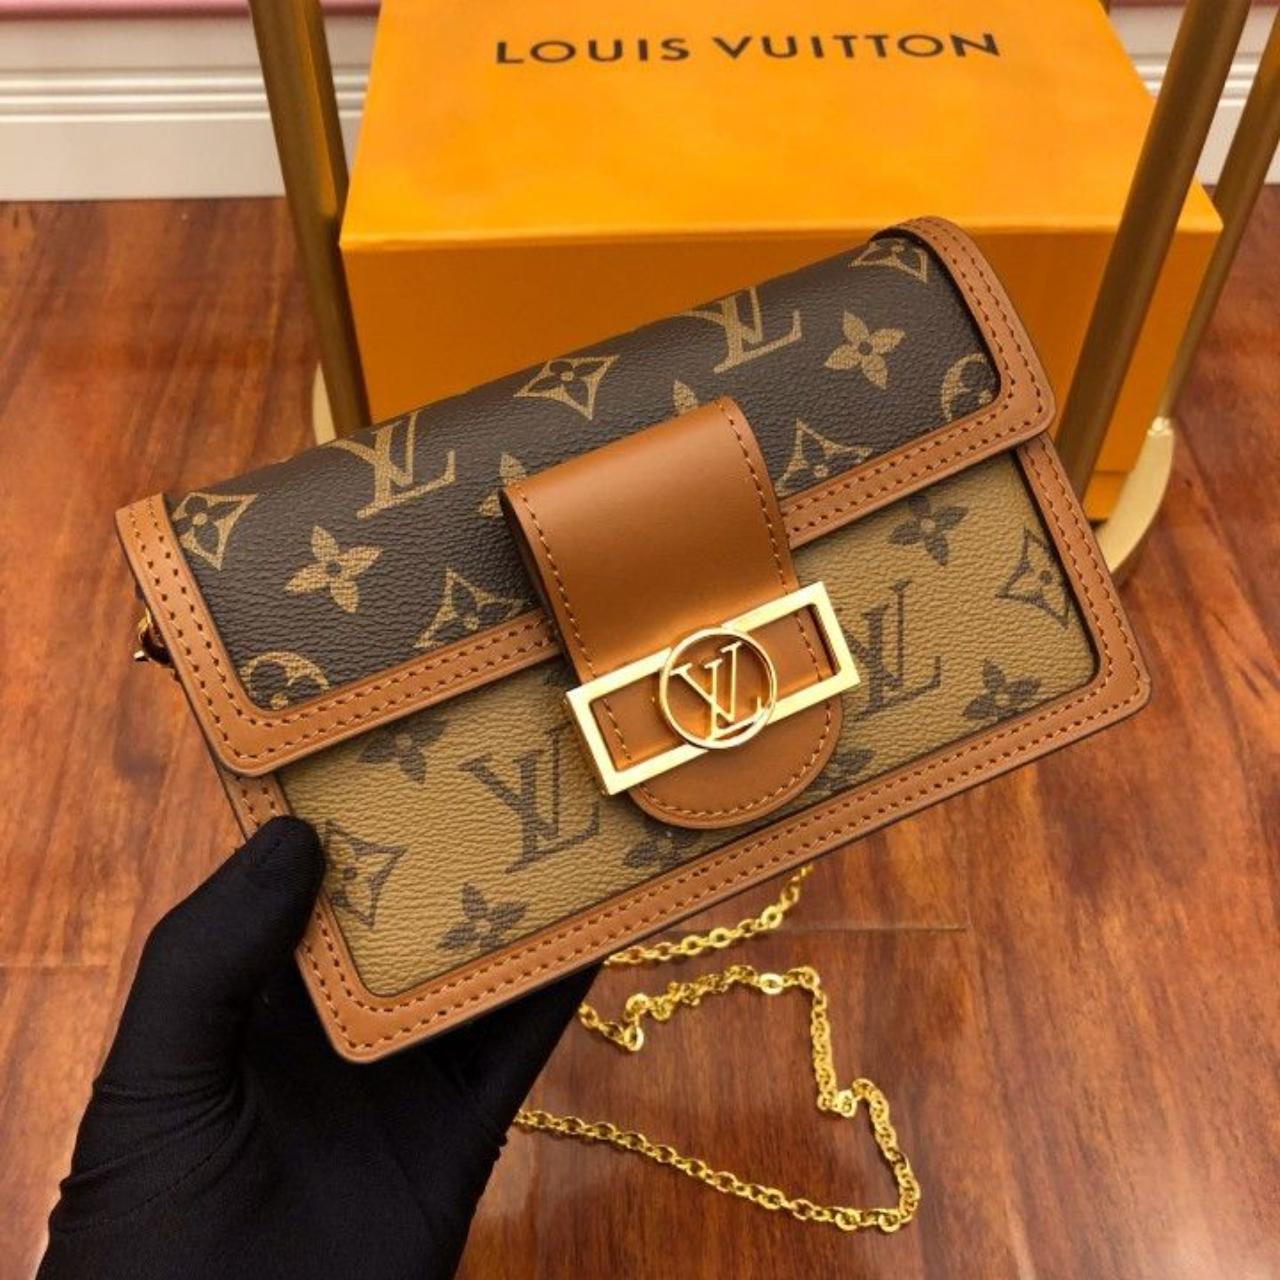 LOUIS VUITTON Comes in a 1oz glass roll on No - Depop